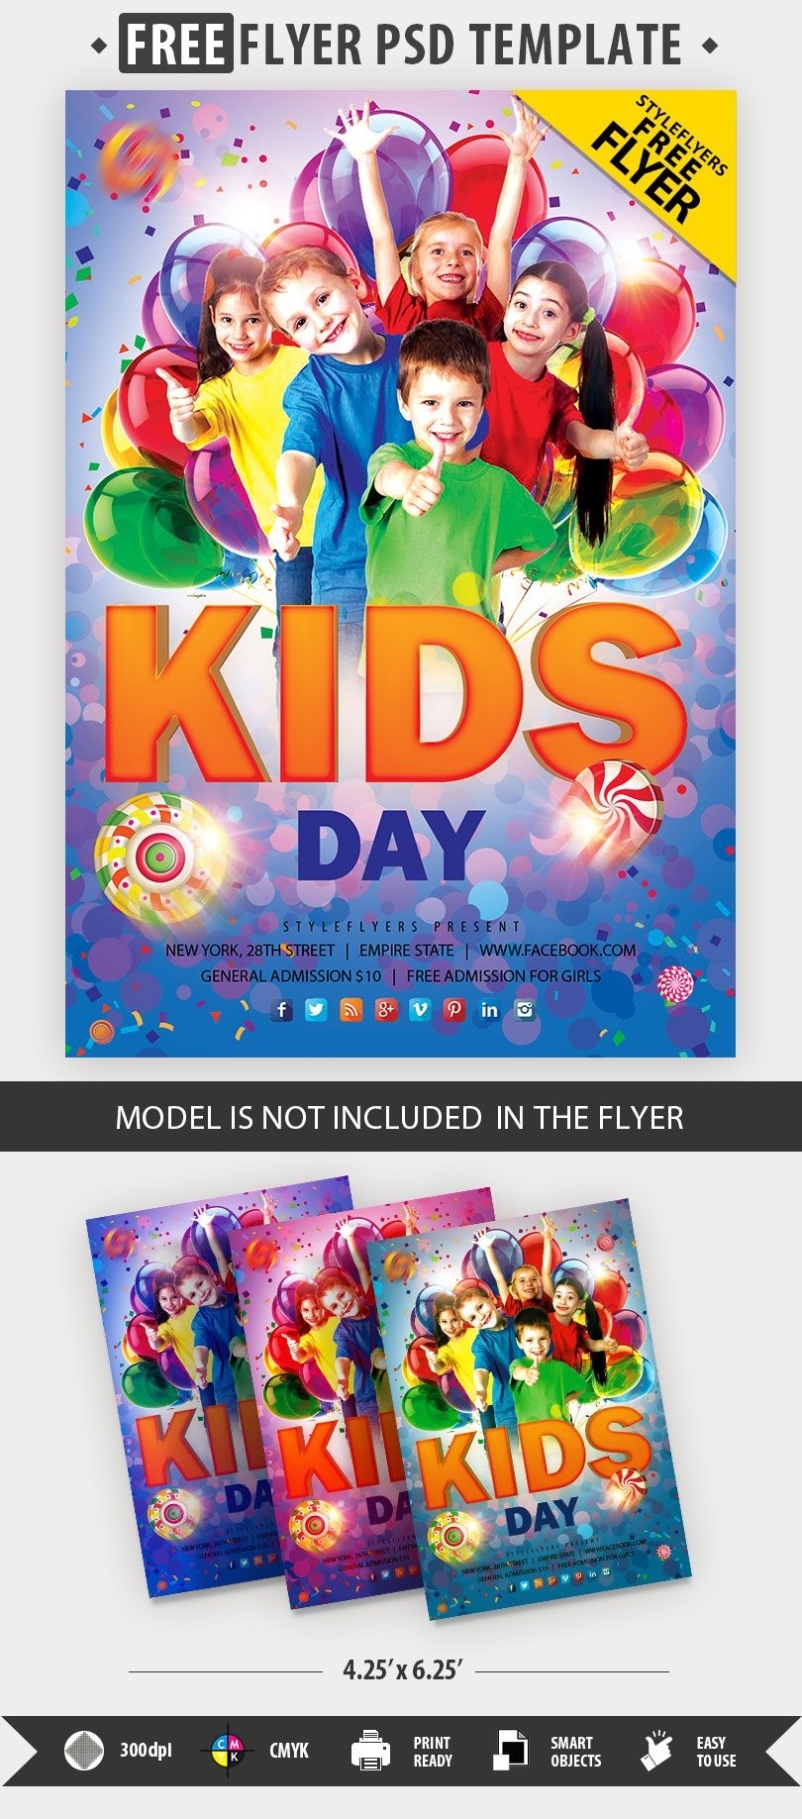 Kids Day Free Psd Flyer Template Free Download #30241 - Styleflyers For Flyer Design Templates Psd Free Download